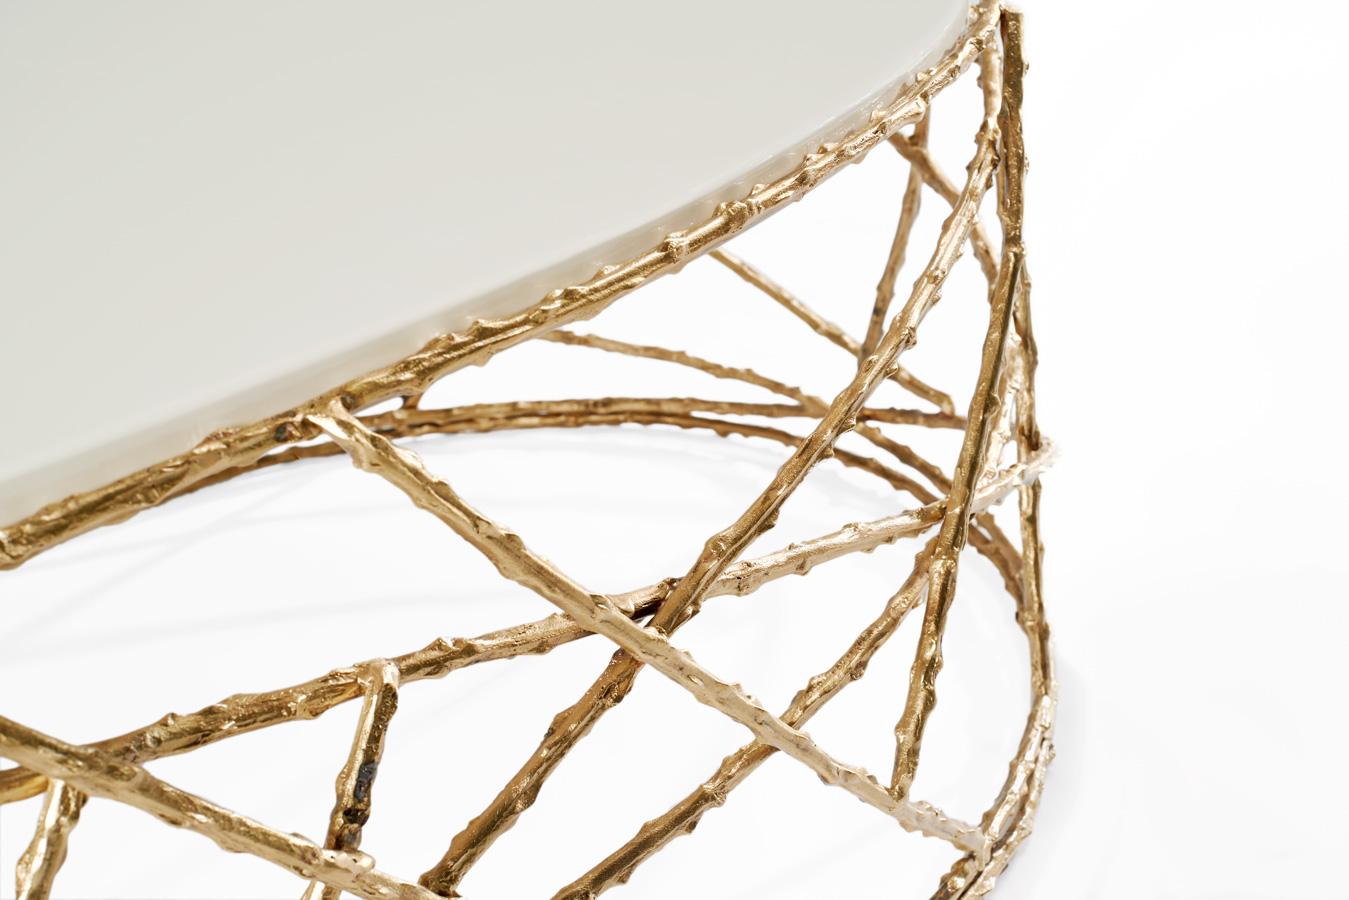 Timeless rosebush branches, skillfully cast in brass, impart a sense of permanence to this refined table. Artisans meticulously hand-assemble the base, while the table's minimalist top provides a calming and harmonious counterpoint to the